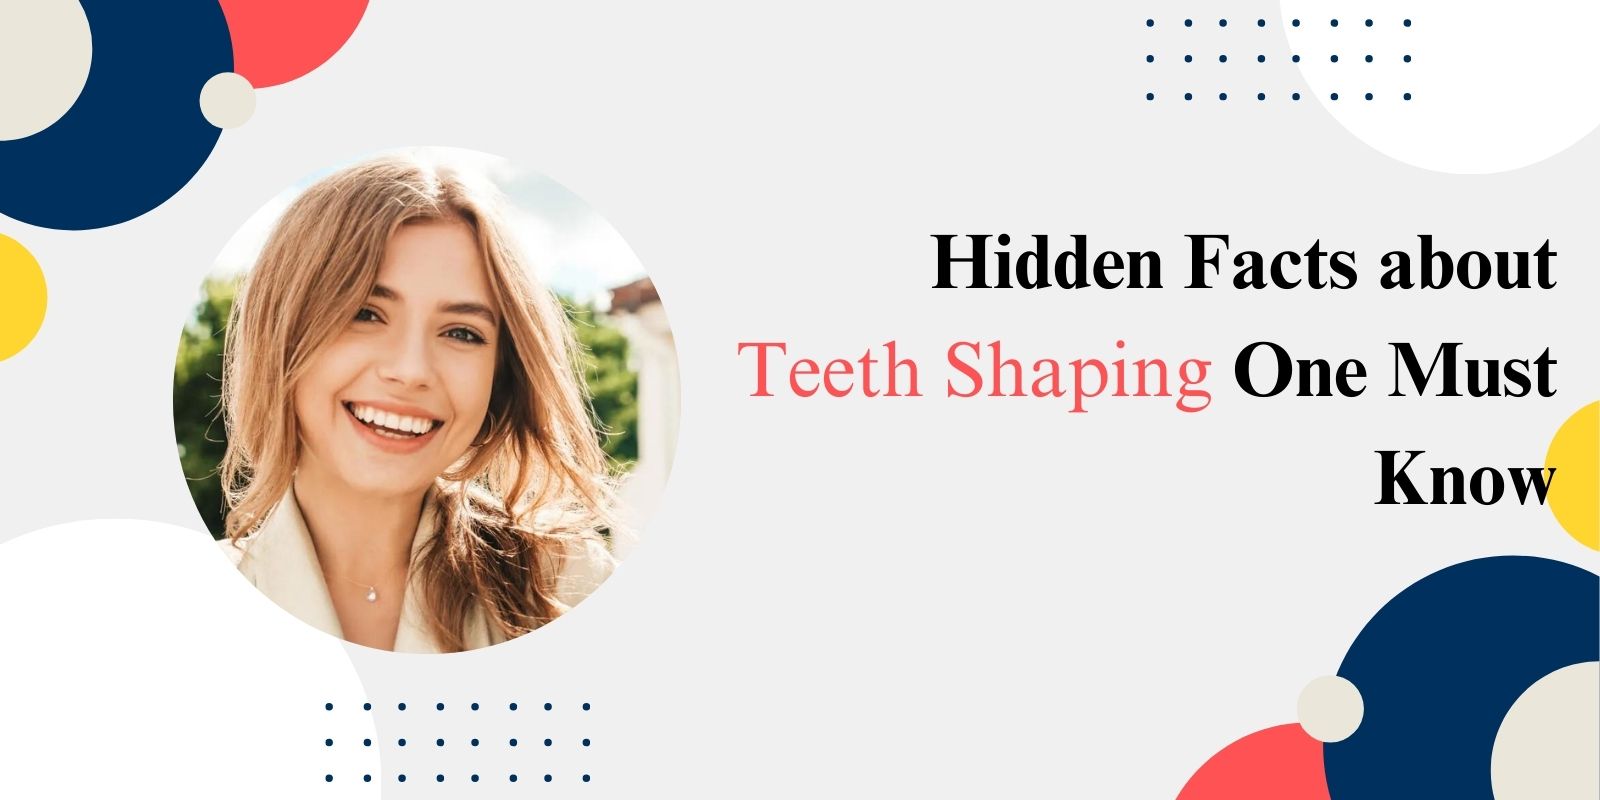 Hidden Facts about Teeth Shaping One Must Know